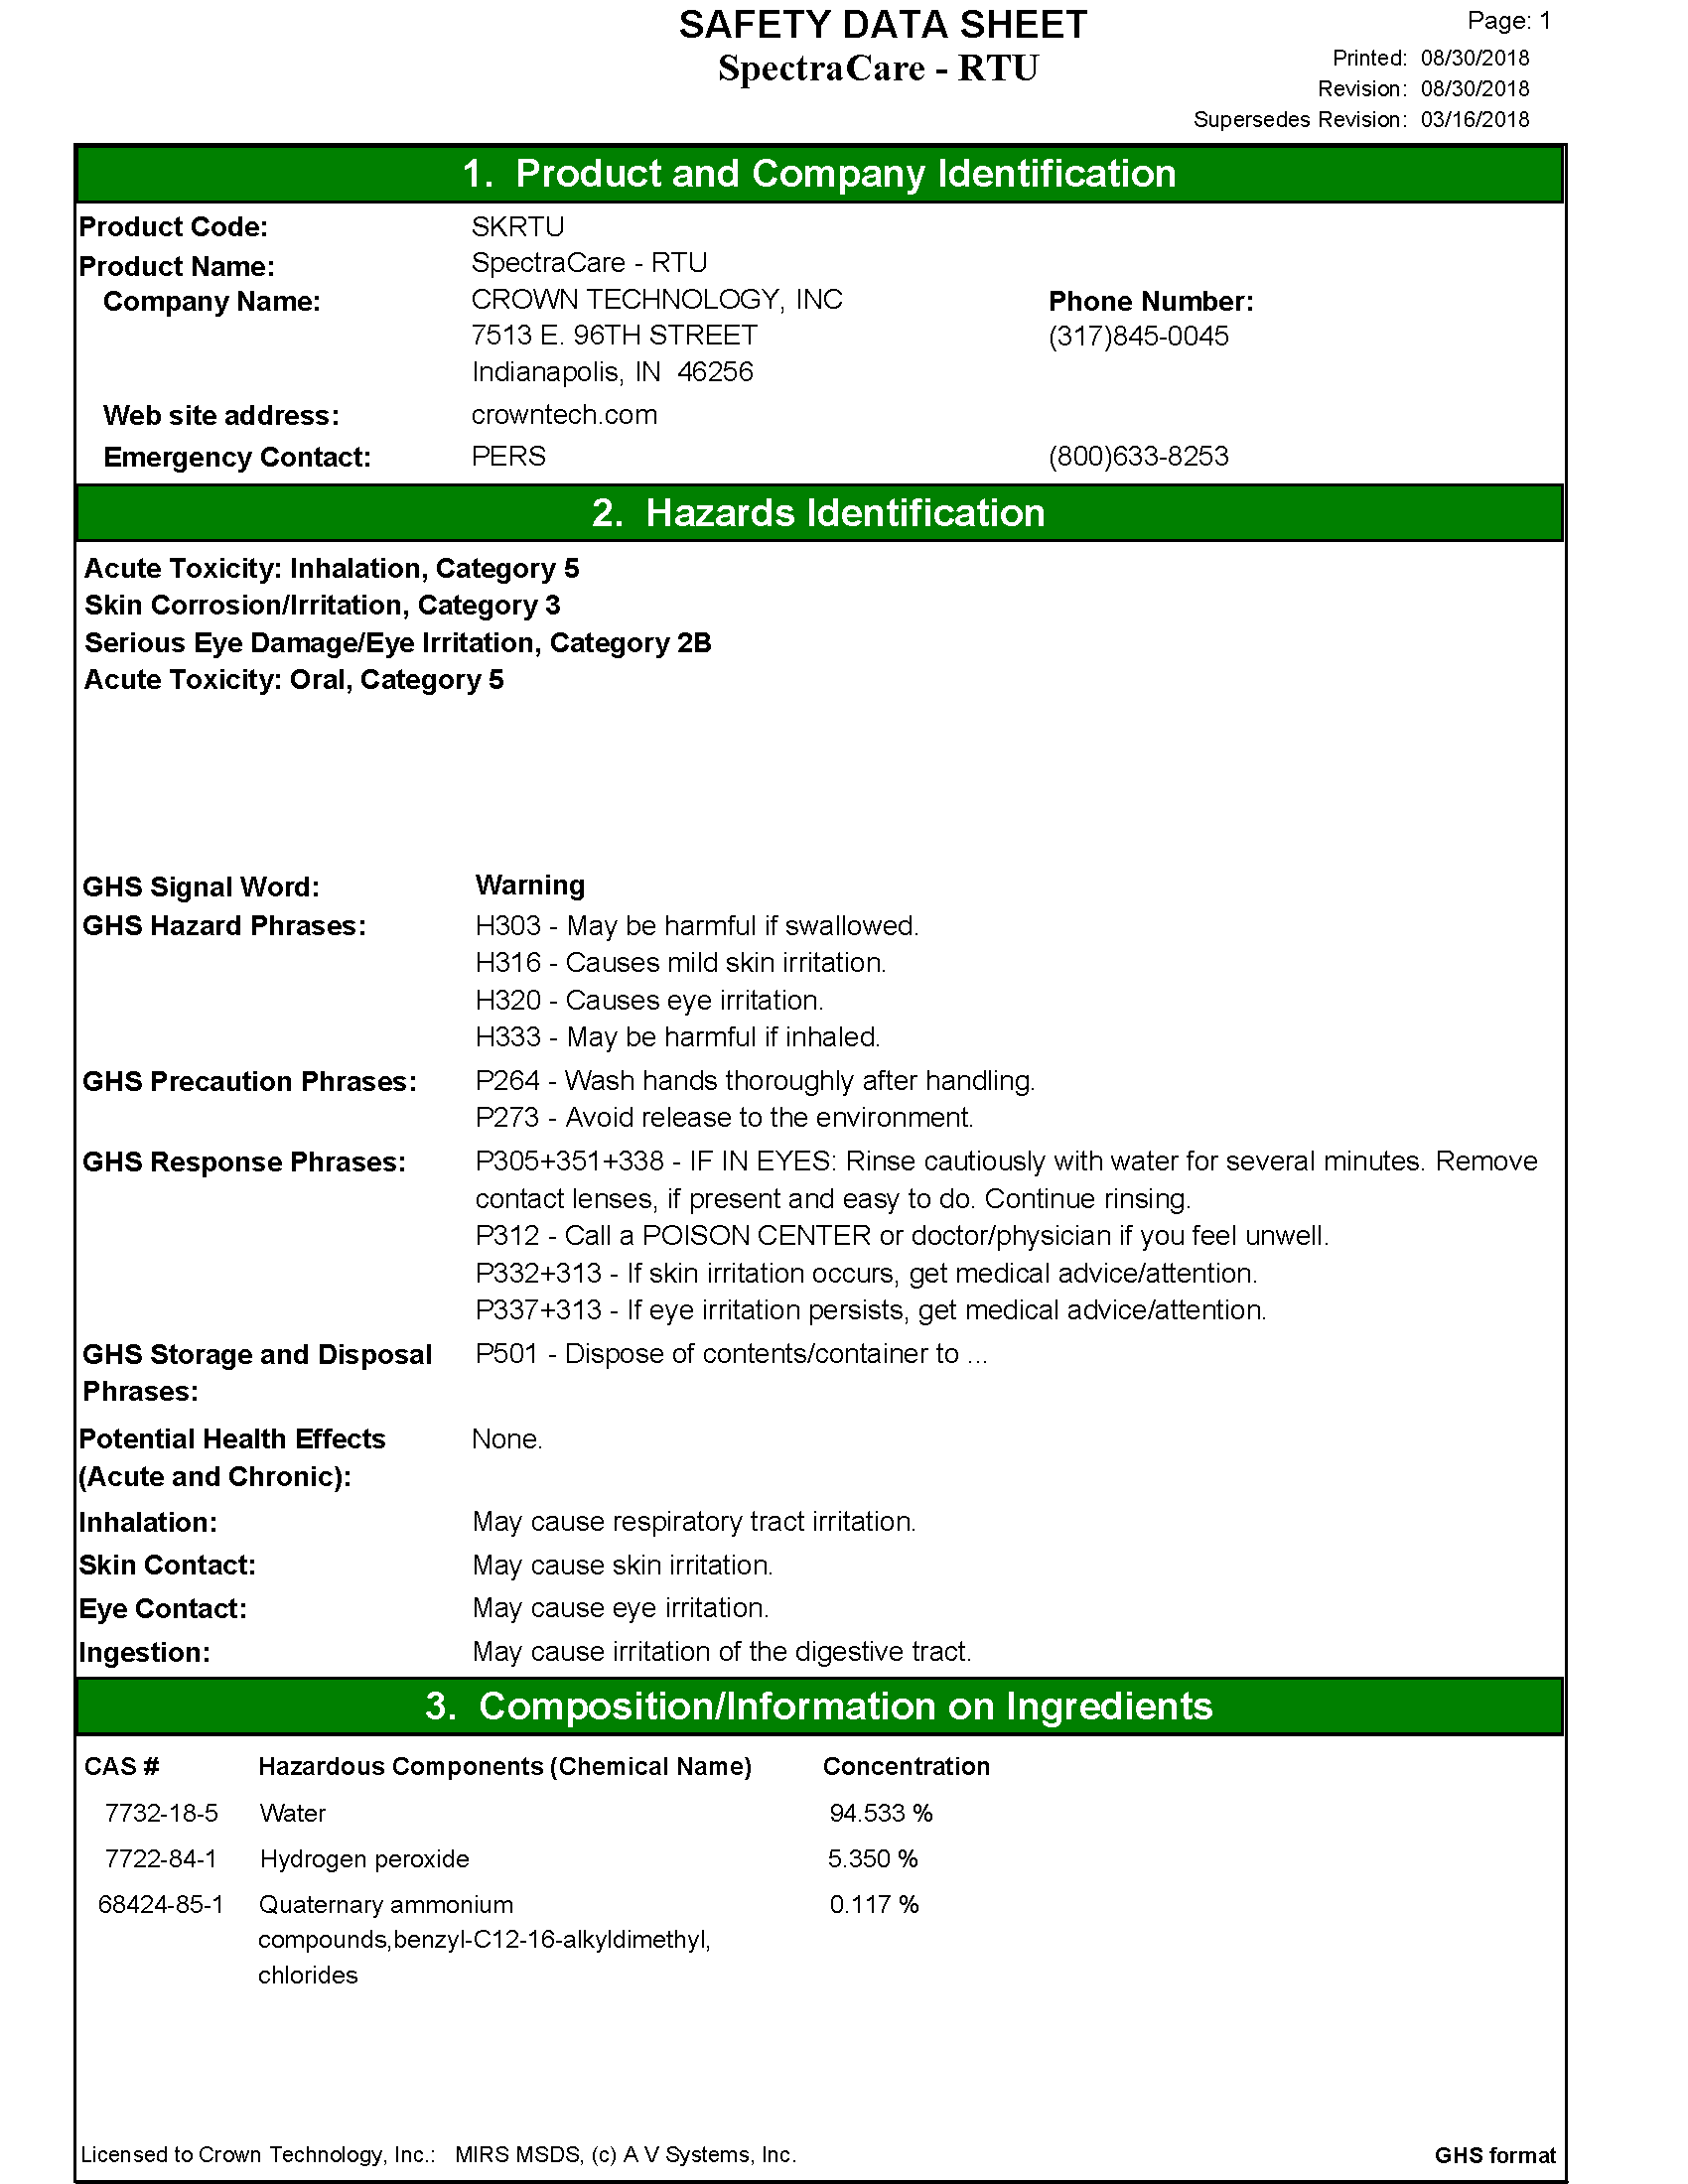 SpectraCare RTU_SDS-Full_Page_1